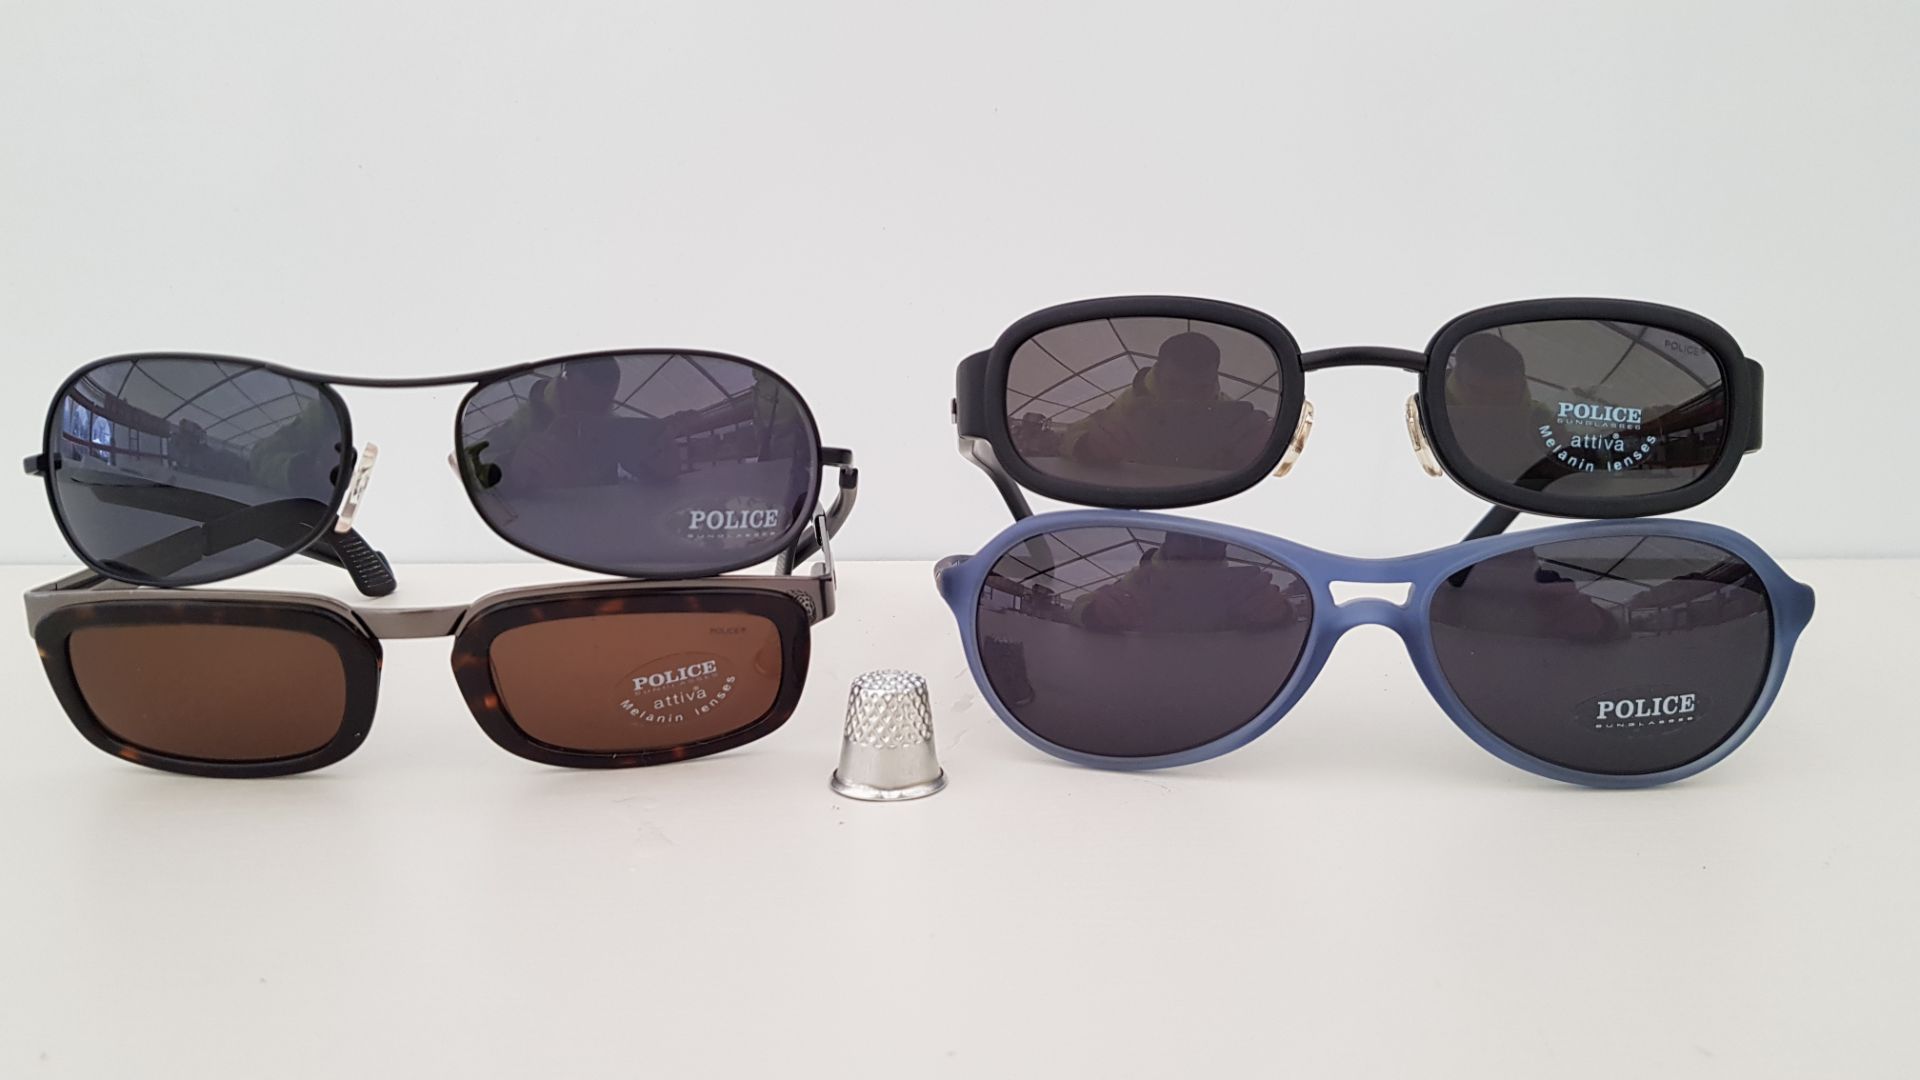 50 X BRAND NEW POLICE SUNGLASSES IN VARIOUS STYLES AND COLOURS - PICK LOOSE